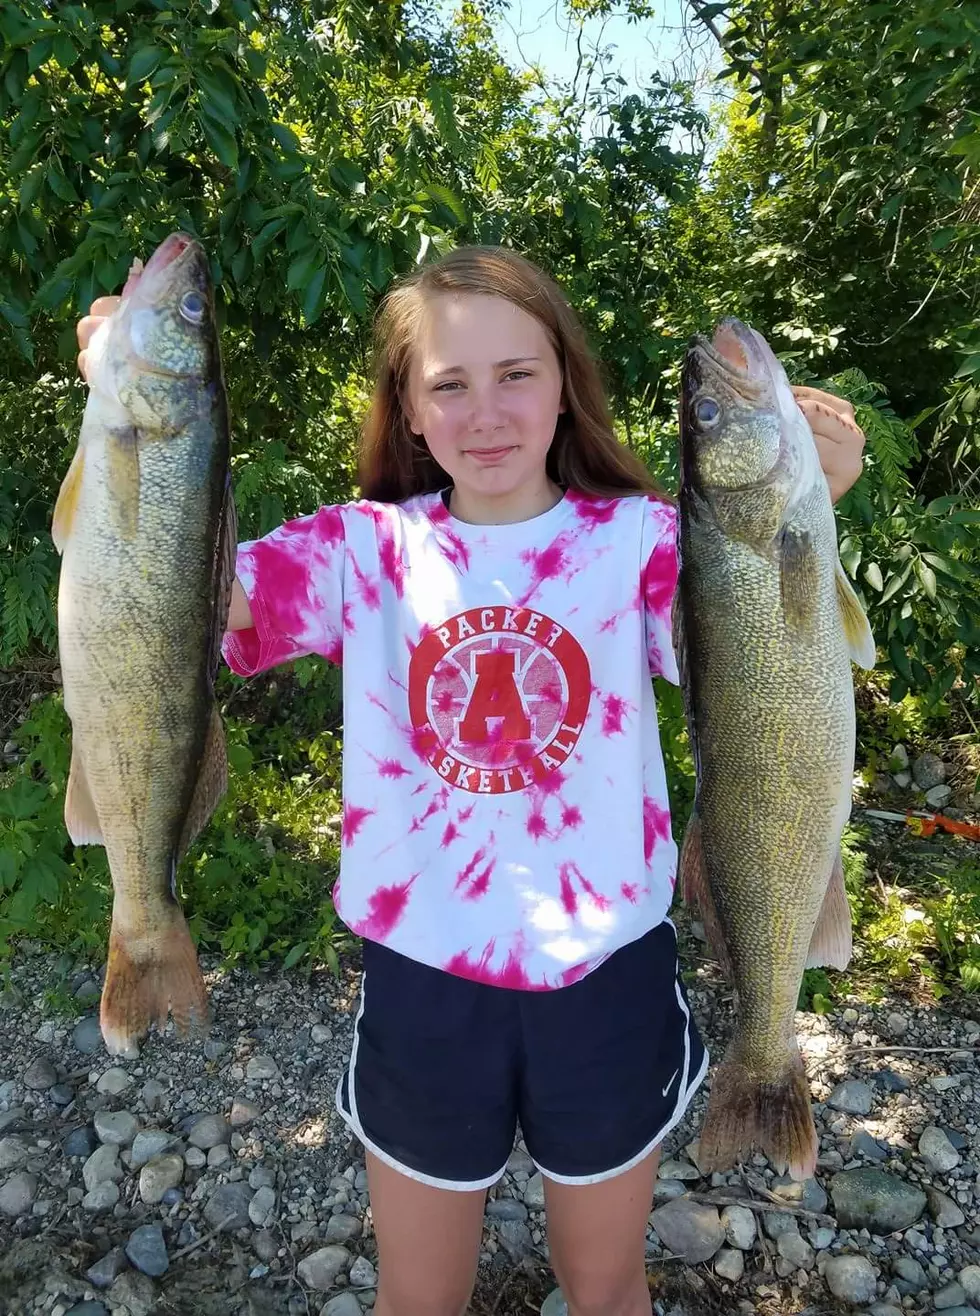 Show Us Your Catch Winner